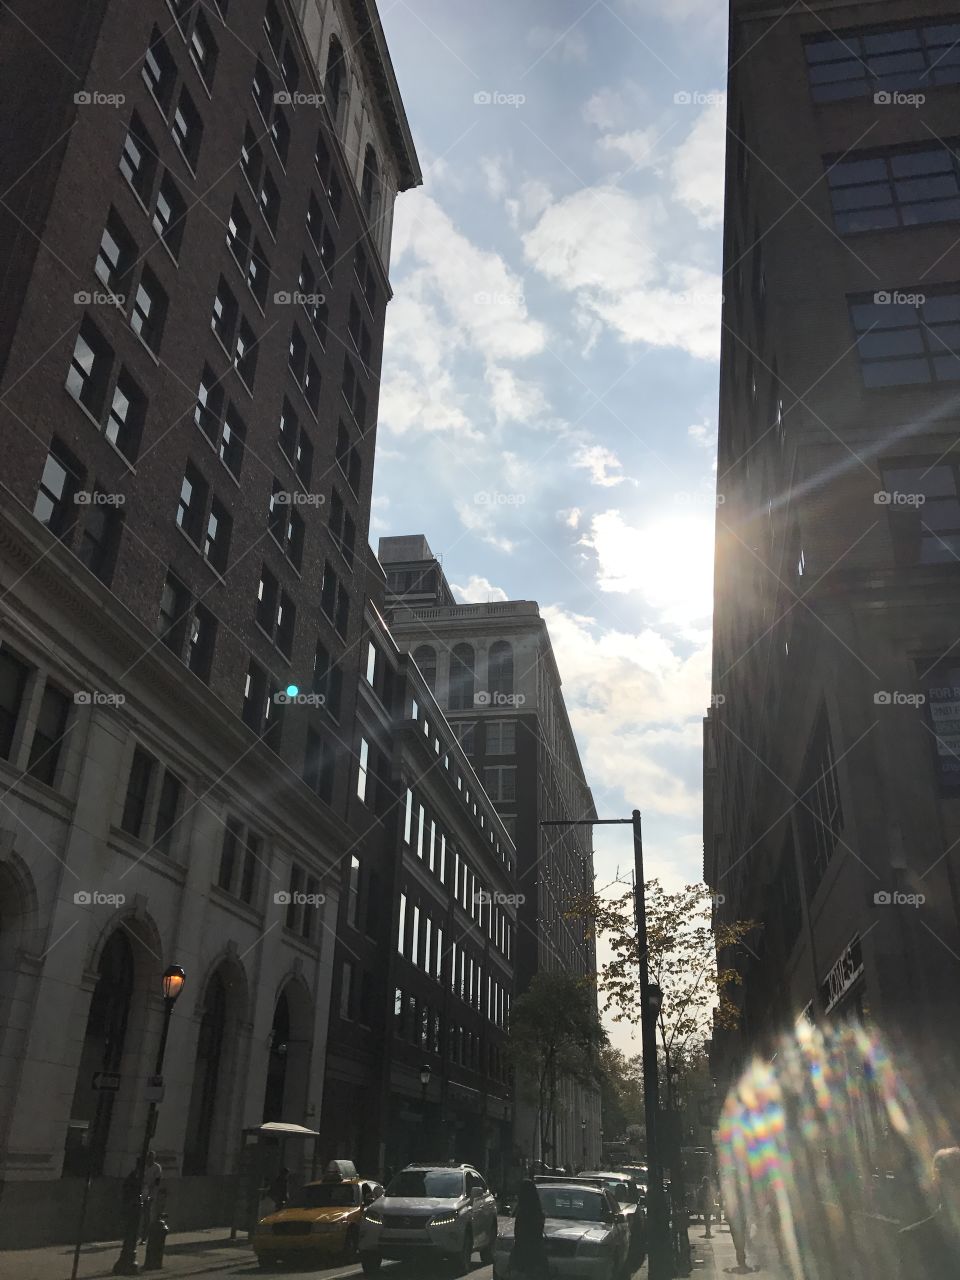 Sunlight on the streets of Philly